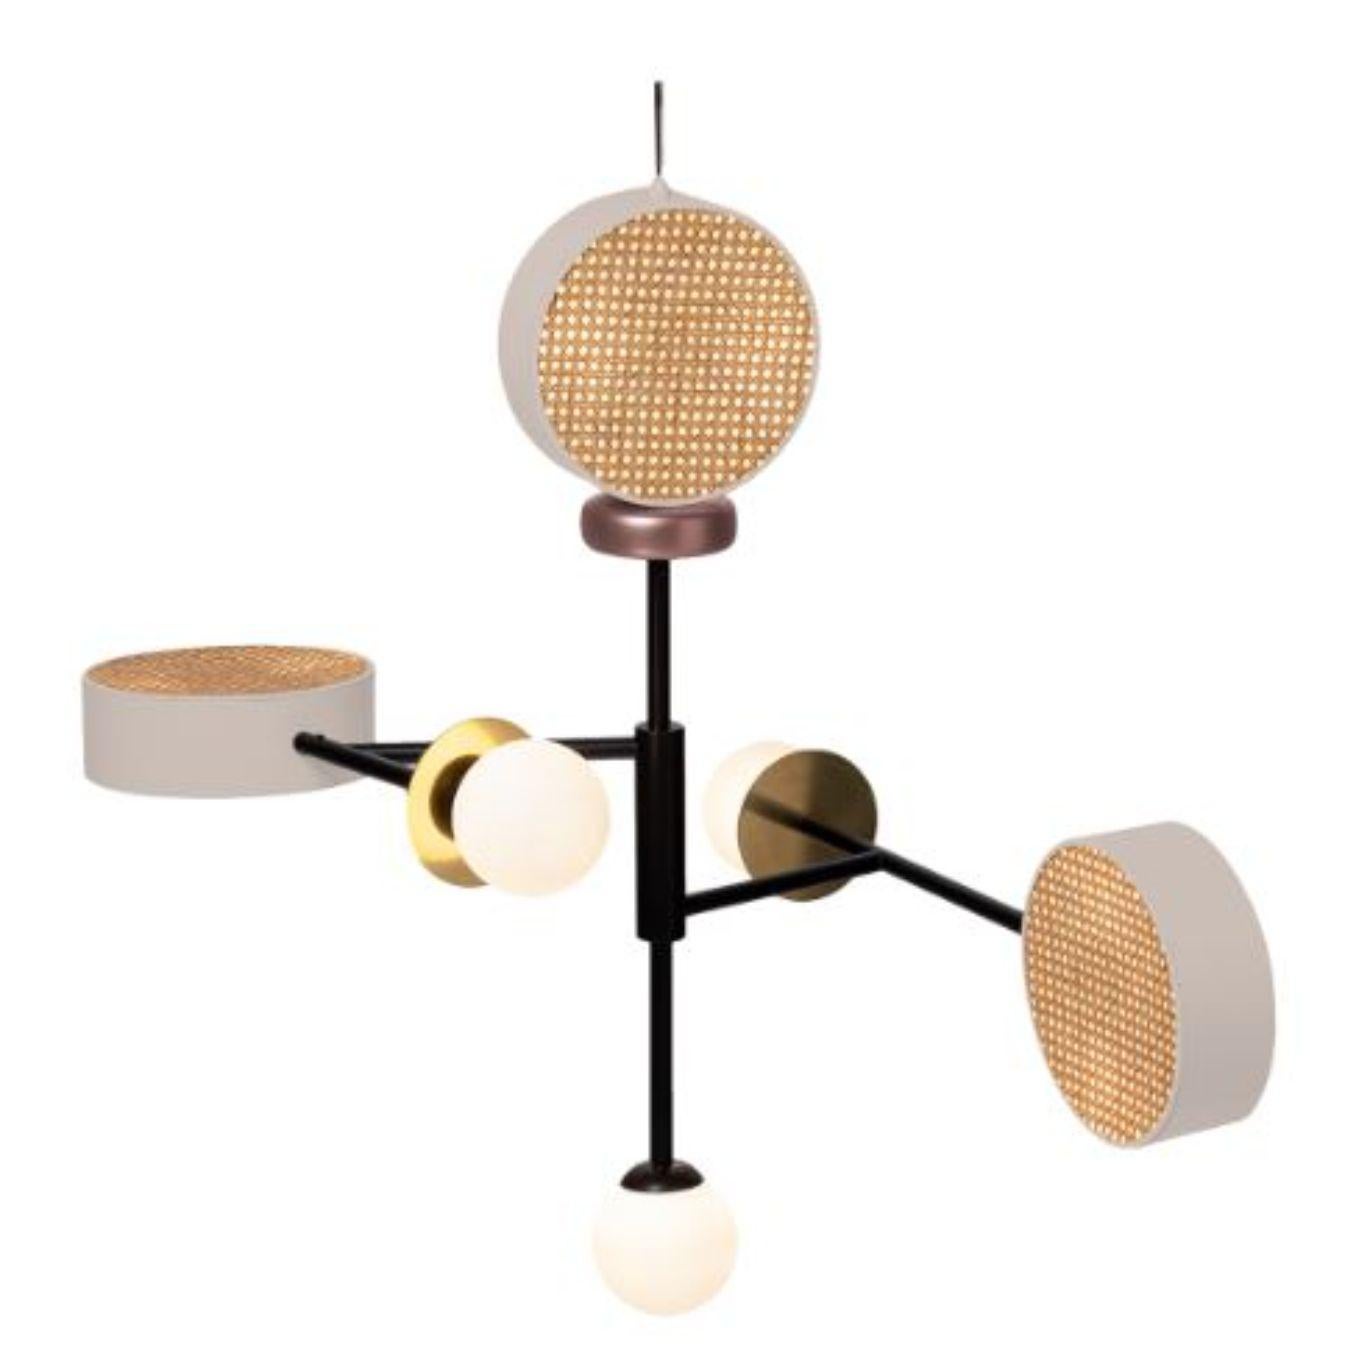 Monaco Suspension lamp by Dooq
Dimensions: W 100 x D 73 x H 106 cm
Structure: lacquered metal / detail: lacquered wood.
Globes: glass.
Light cylinders: lacquered metal, natural rattan.
Circles: polished or satin brass or nickel.

Light source